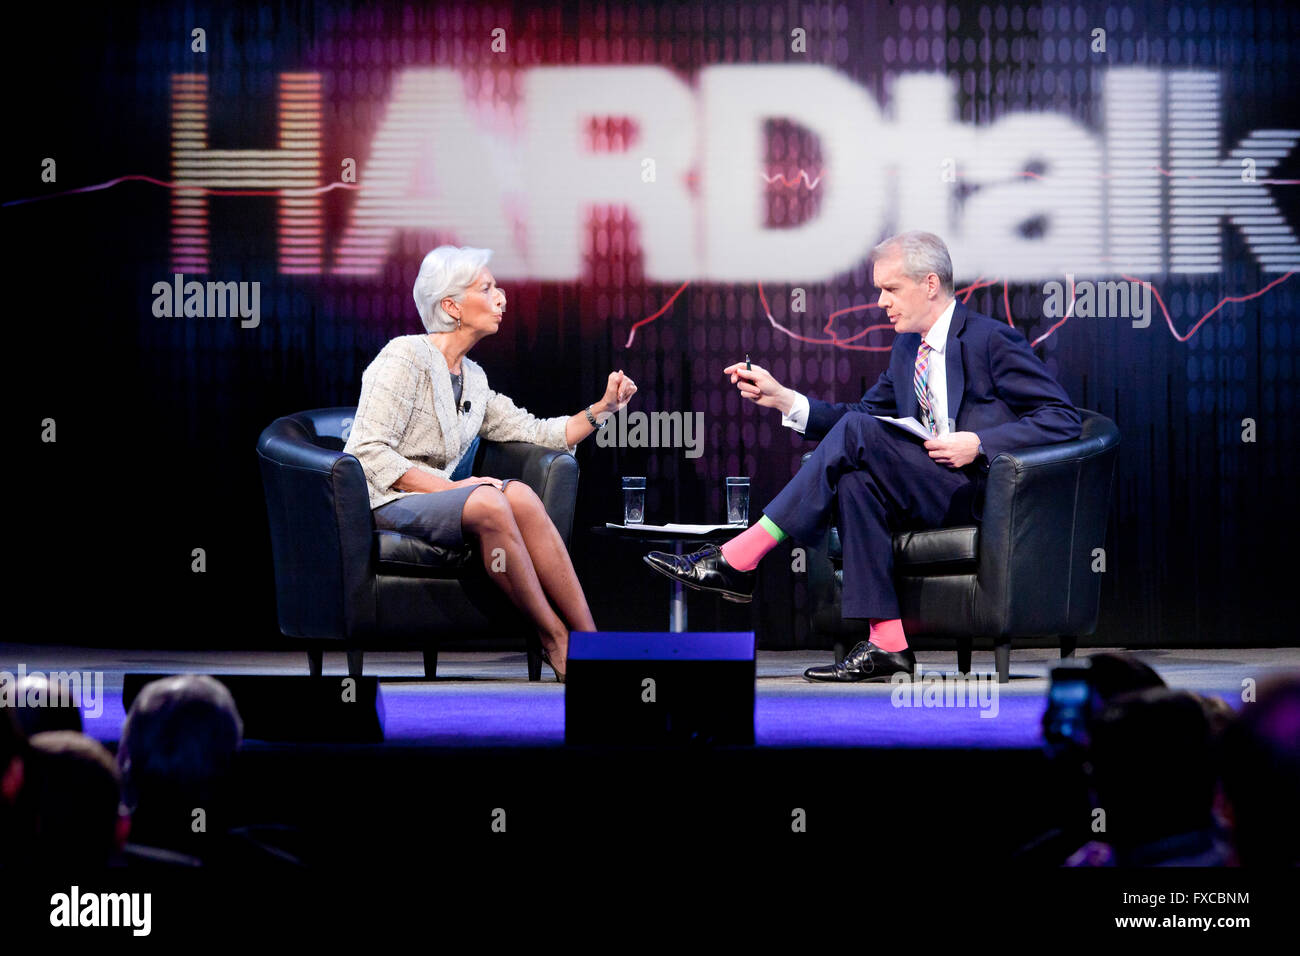 Washington DC, USA. 14th April, 2016.  Stephen Sackur of the BBC's HARDtalk interviews Managing Director of the IMF, Christine Lagarde on key issues in the global economy. Credit:  B Christopher/Alamy Live News Stock Photo